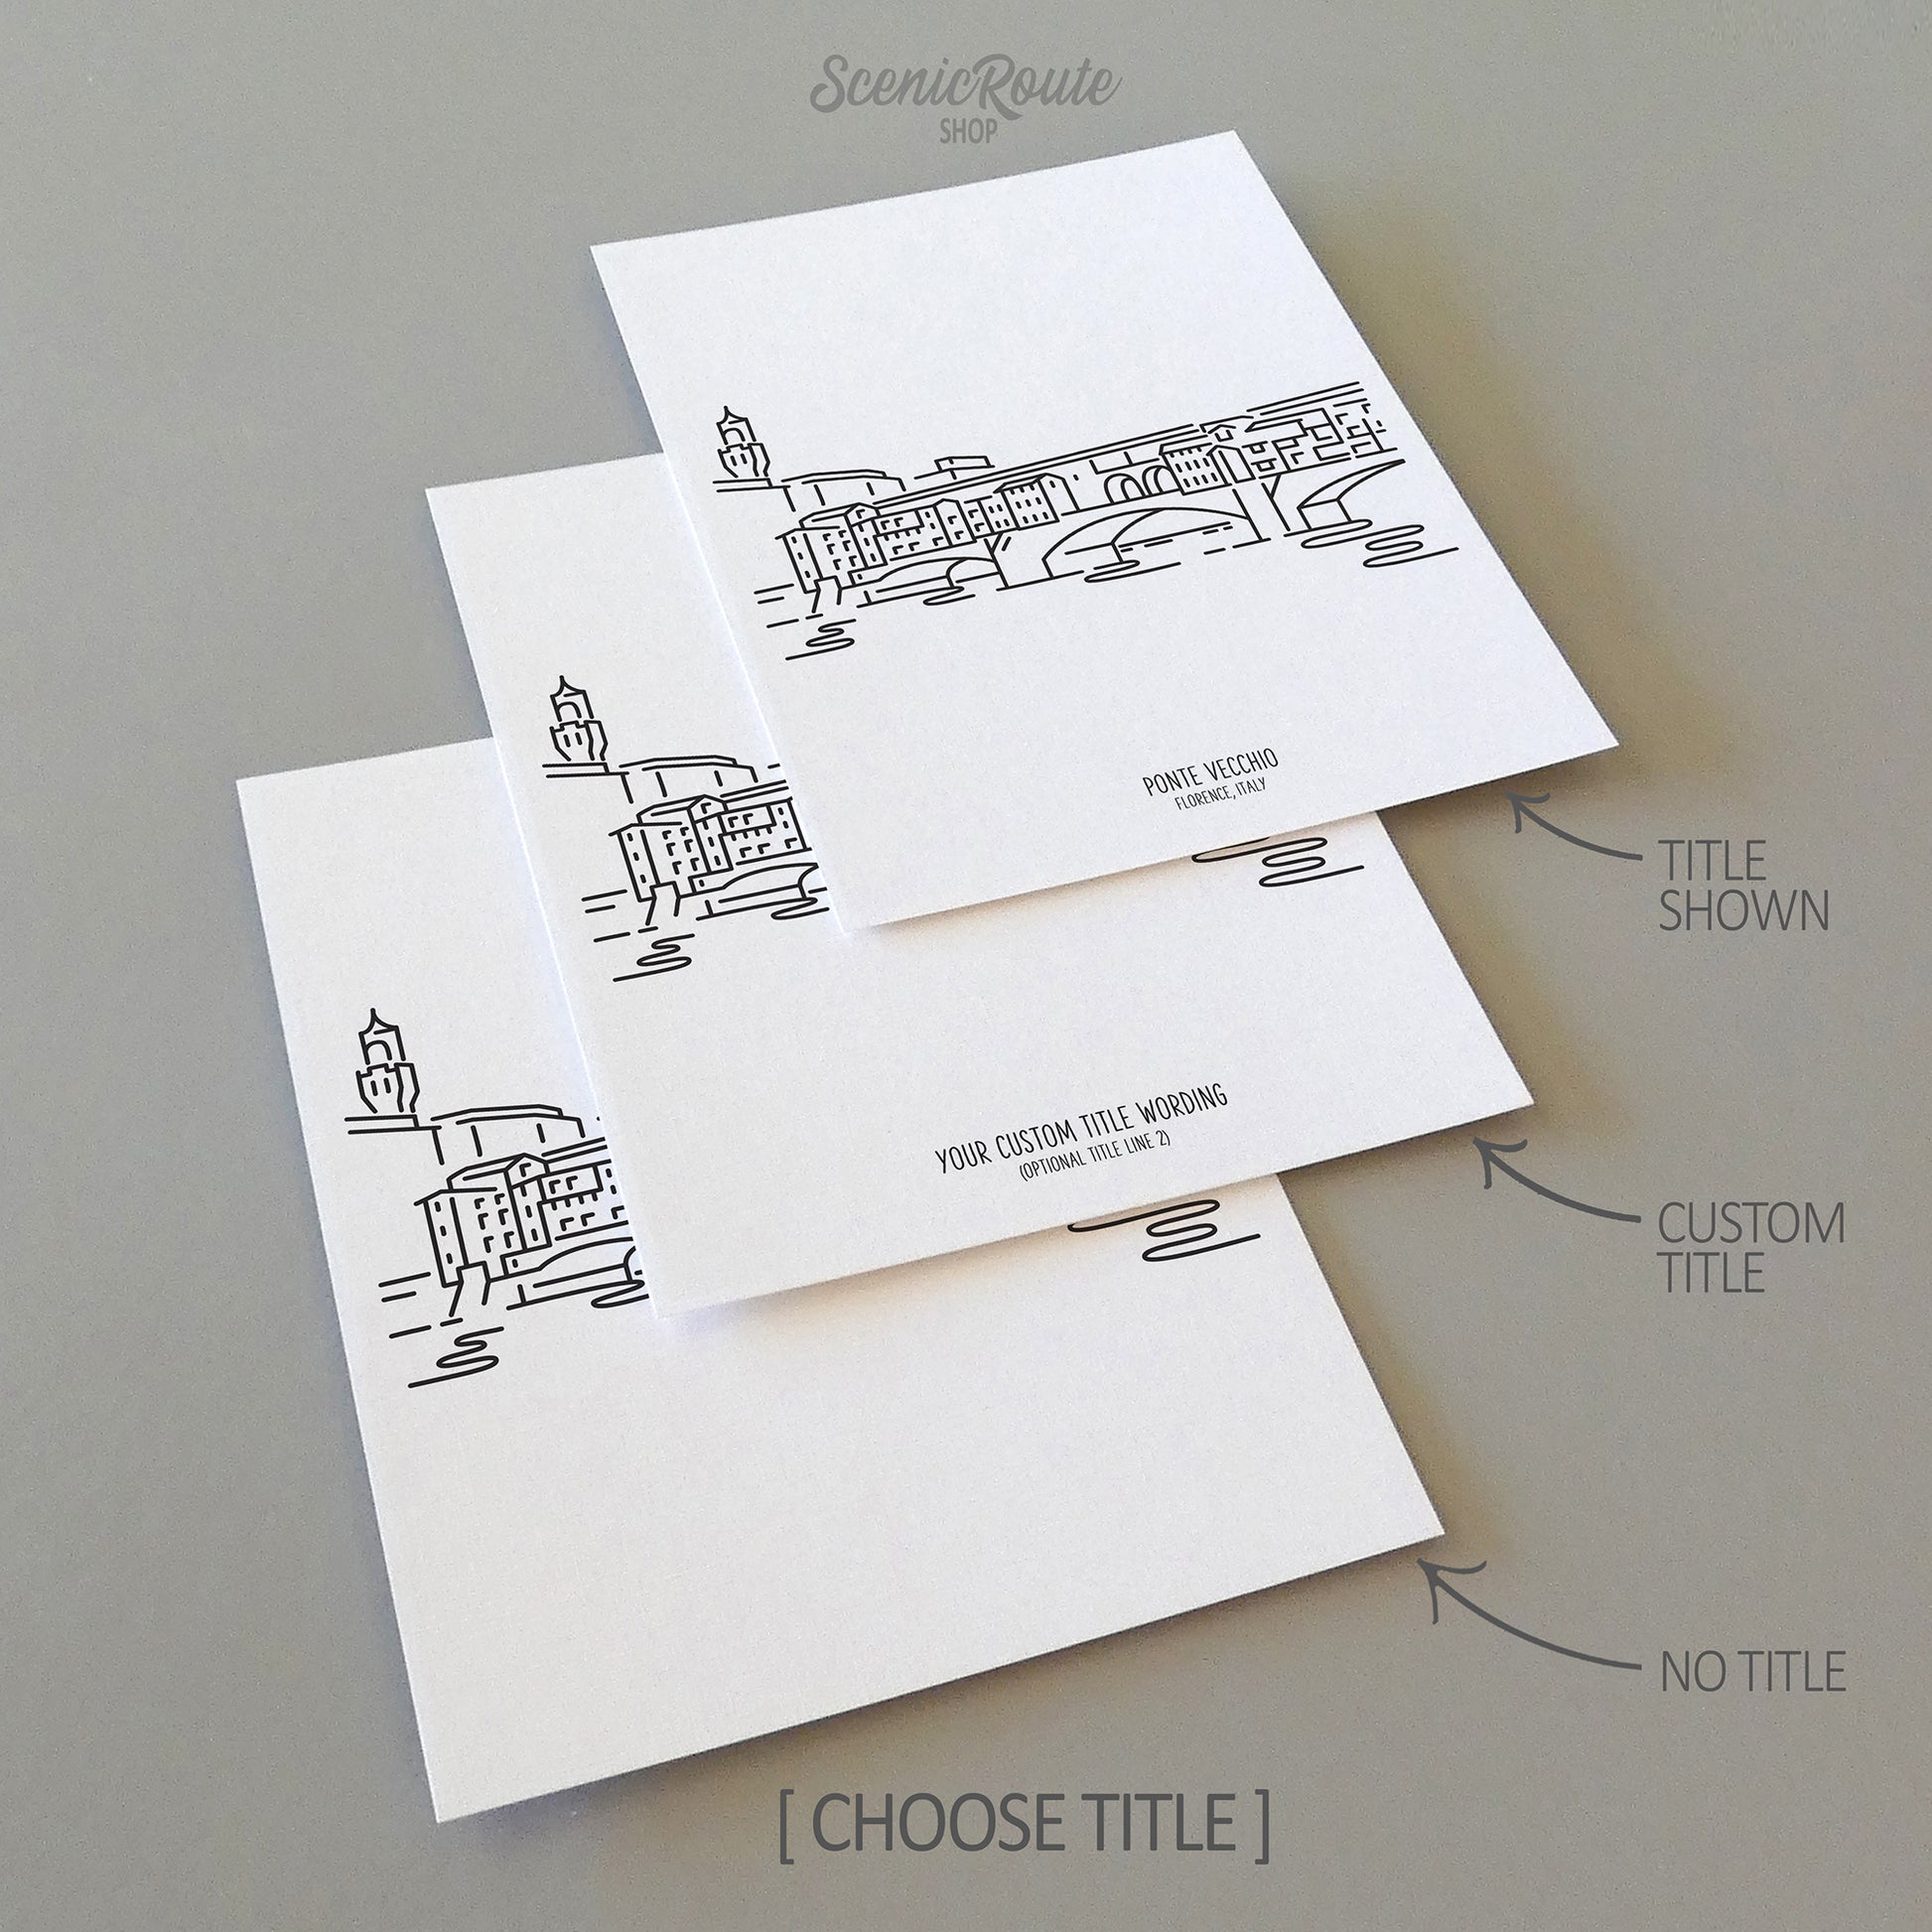 Three line art drawings of the Ponte Vecchio in Florence Italy on white linen paper with a gray background.  The pieces are shown with title options that can be chosen and personalized.